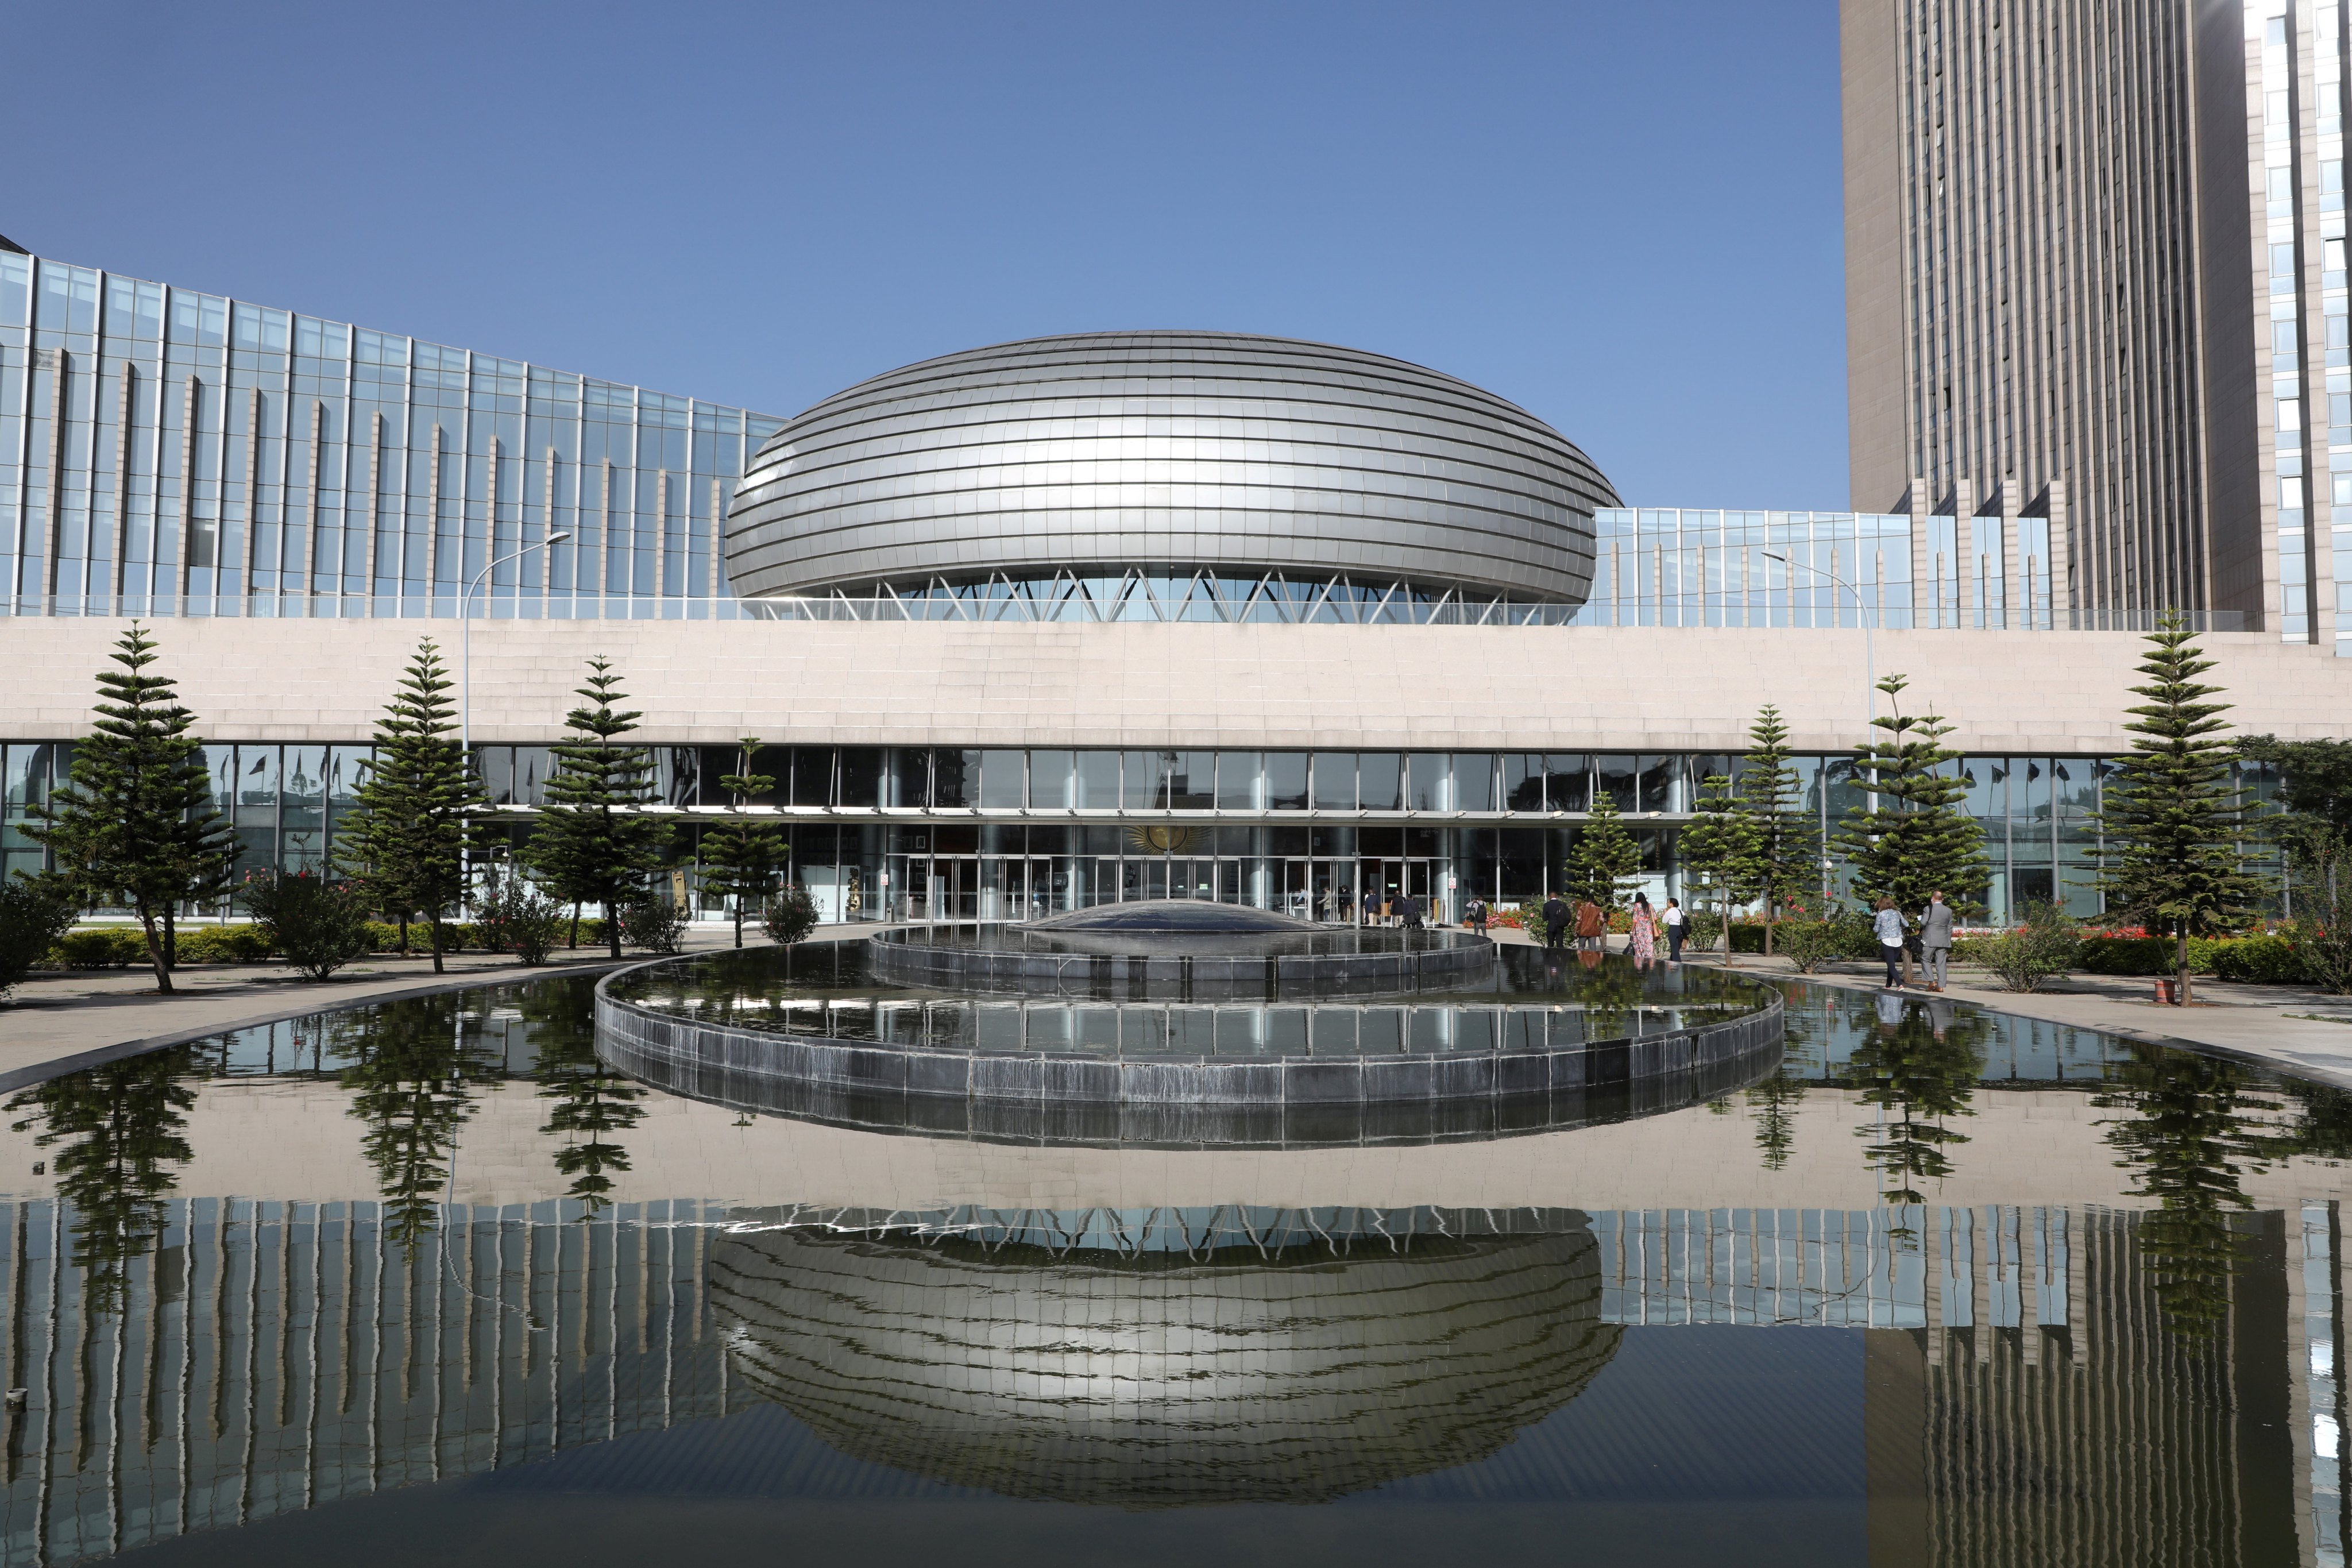 The facade of the headquarters of the African Union in Addis Ababa. The building, funded and built by Chinese entities, is symbolic of the country’s engagement with the continent. Photo: AFP